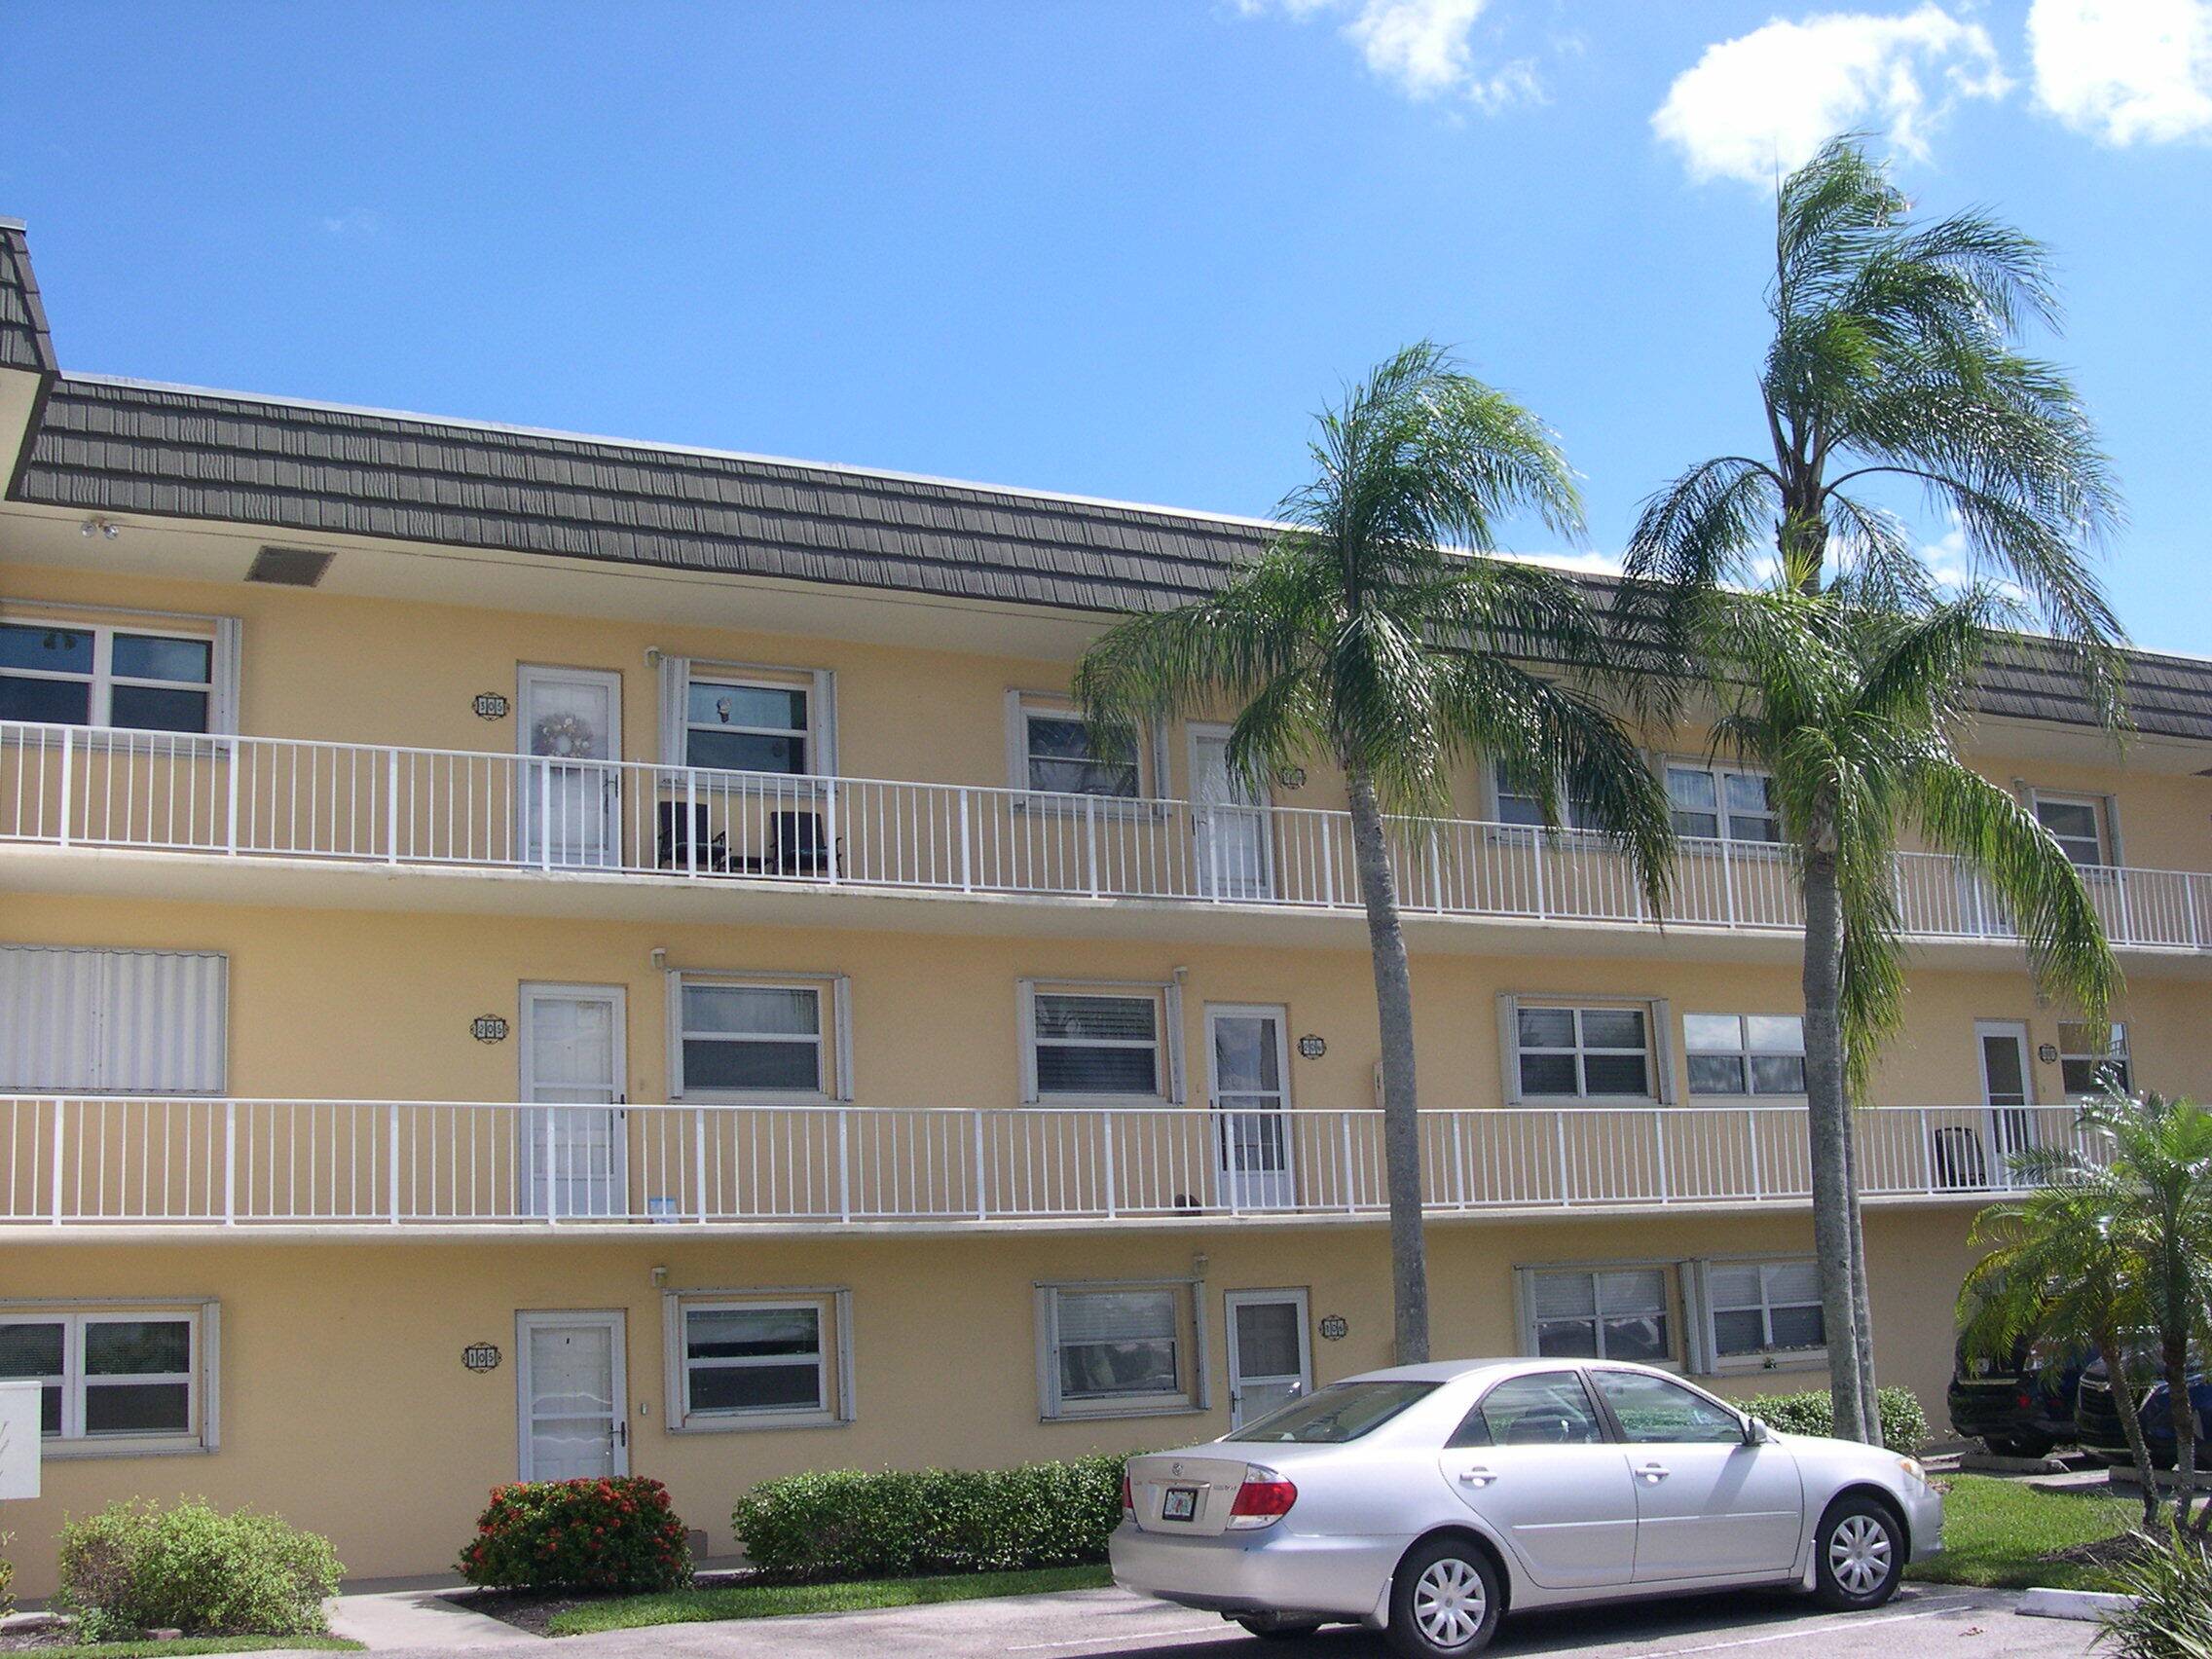 Great top 3rd floor 2 2 plus large Florida Room right on Faber Cove and the fabulous ocean access deep water reasonably priced Colonnades marina.